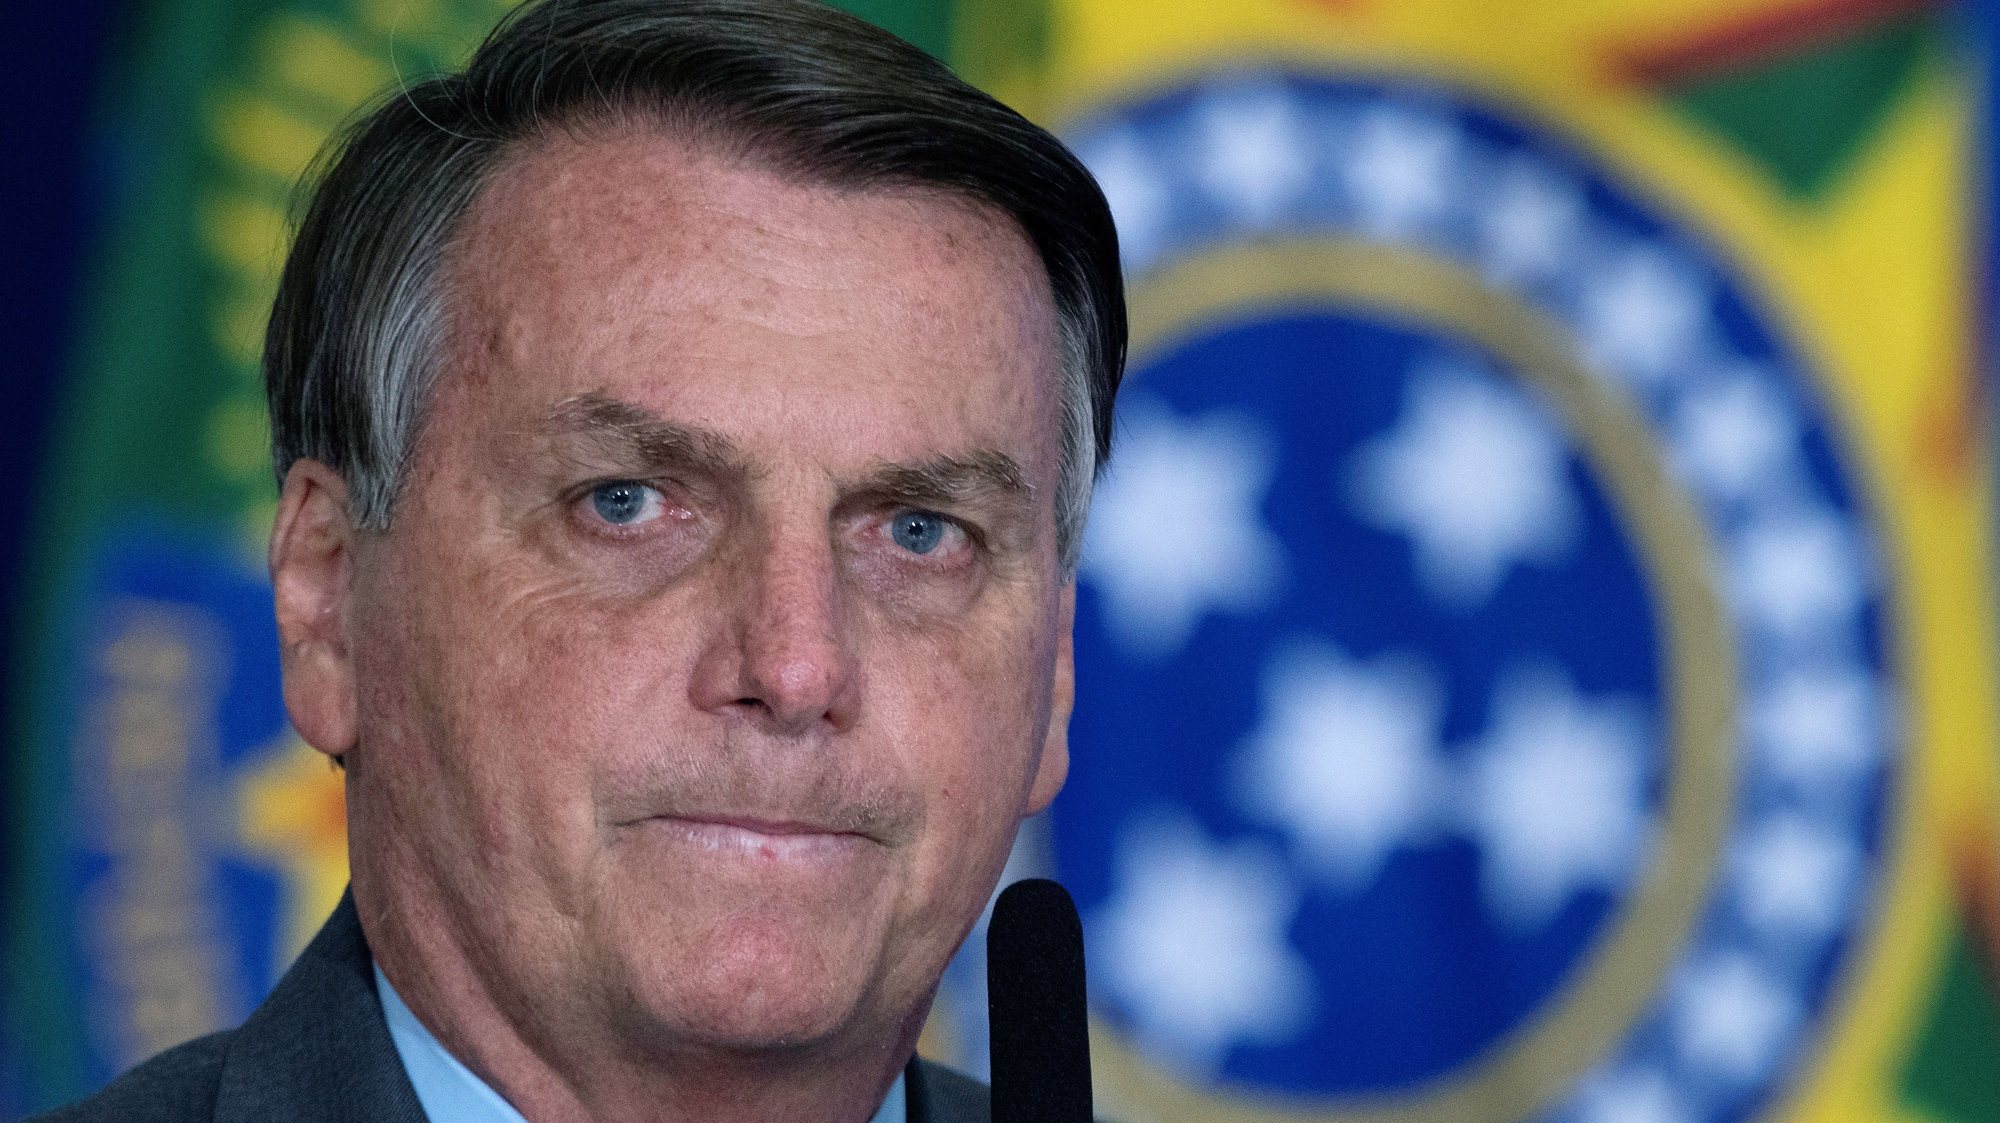 epa09340497 (FILE) - Brazilian President Jair Bolsonaro participates in the launching ceremony of the Los Gigantes de lo Alfalto program, in Brasilia, Brazil, 18 May 2021 (reissued 12 July 2021). Brazilian Federal Police on 12 July 2021 opened an investigation against Brazilian President Bolsonaro for breach of duty over the purchase of Covaxin.  EPA/Joedson Alves *** Local Caption *** 56905212